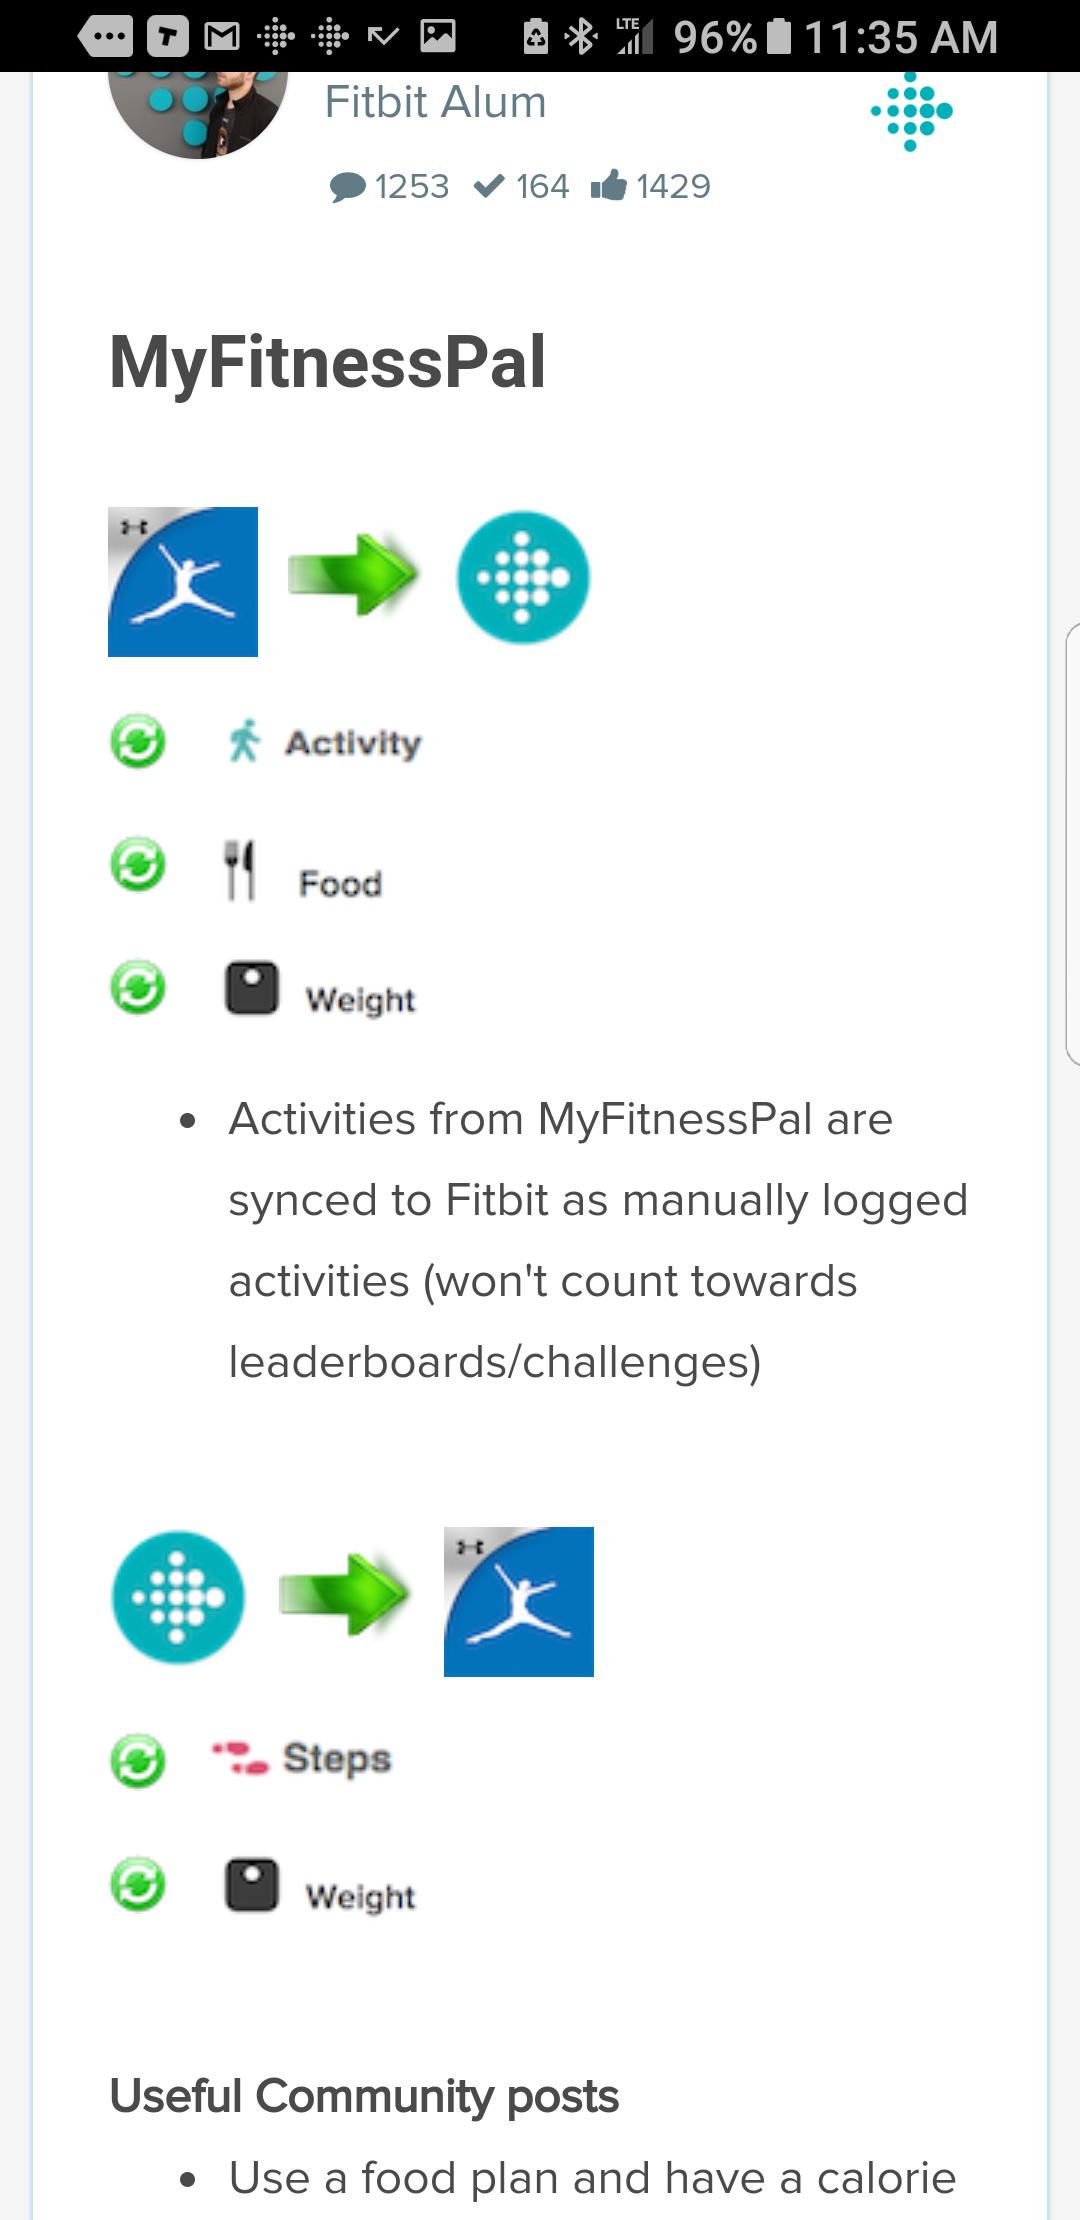 How to setup and use your Fitbit with MyFitnessPal 